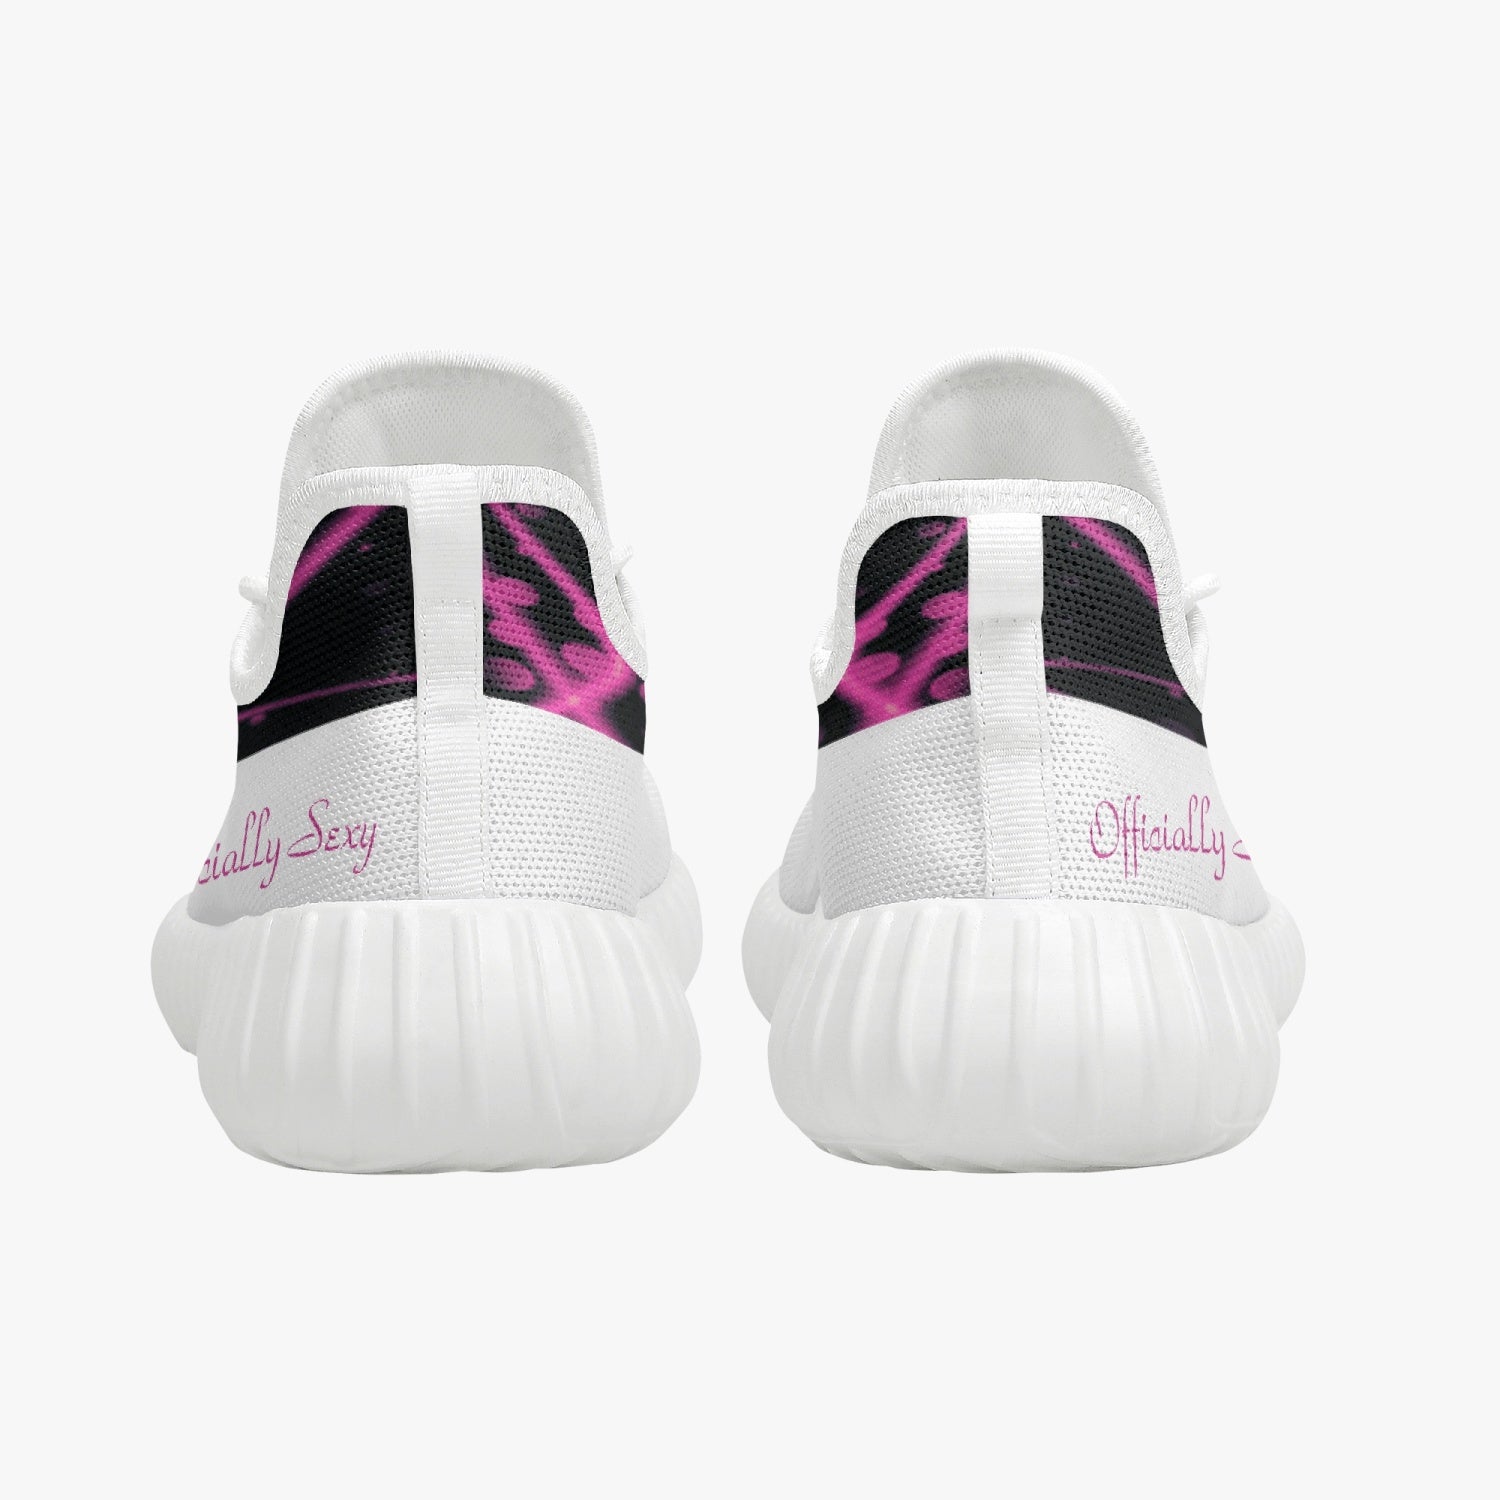 Officially Sexy Pink & White Laser Print Mesh Knit Sneakers - With White or Black Sole